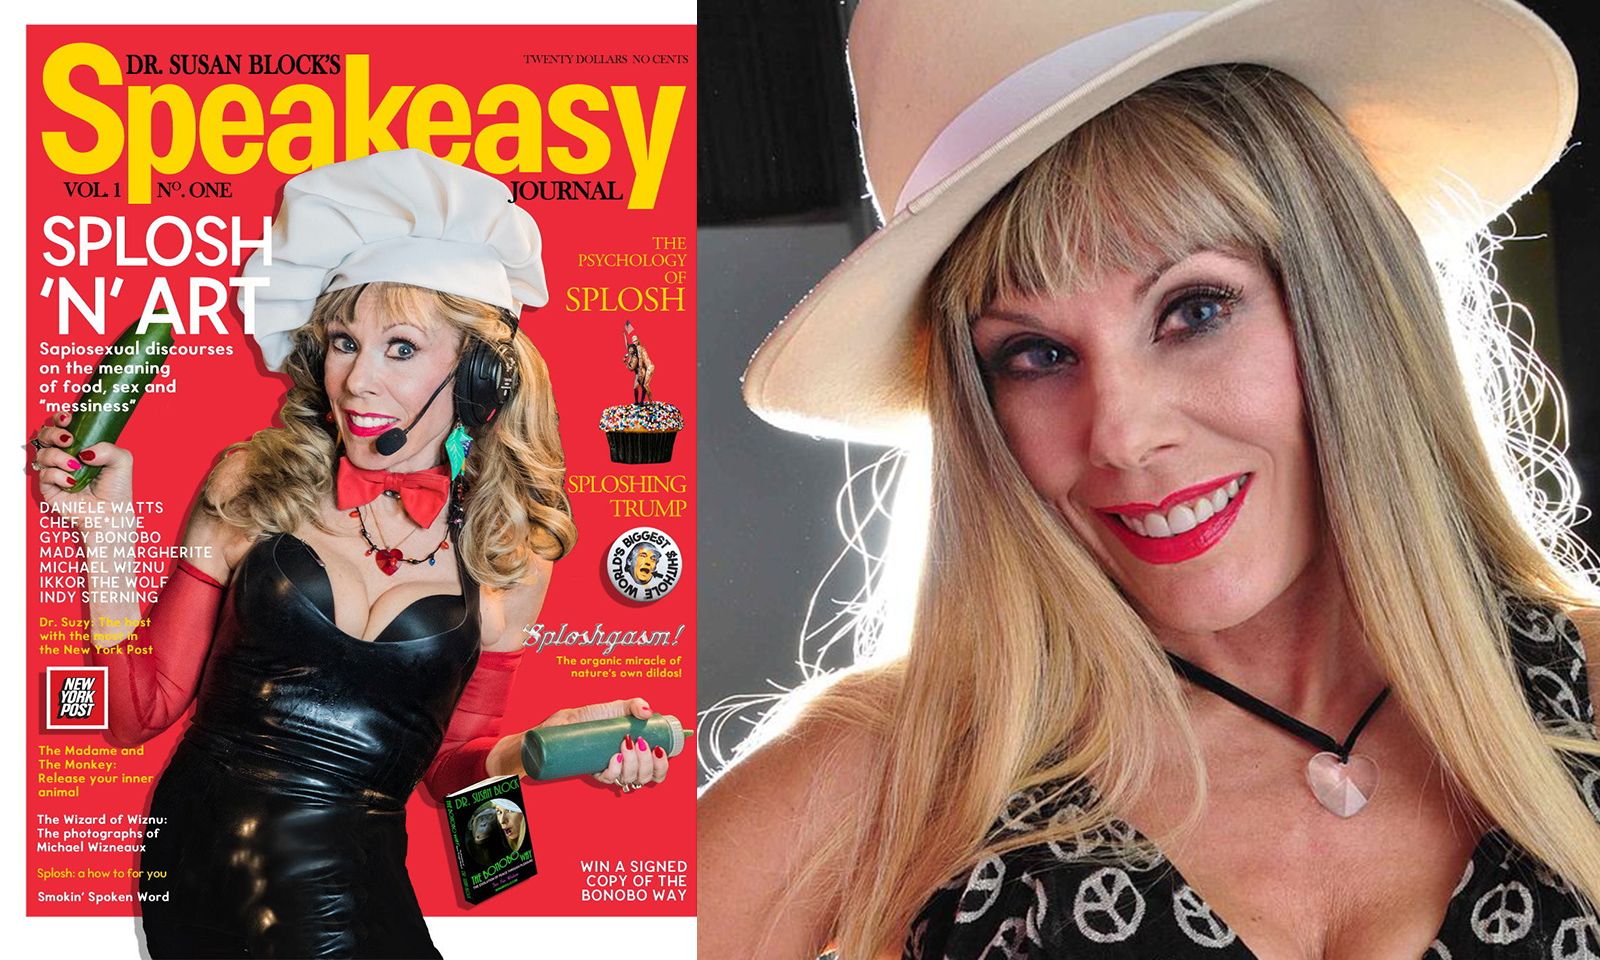 Inaugural Issue Of Dr. Susan Block's Speakeasy Journal Is Out